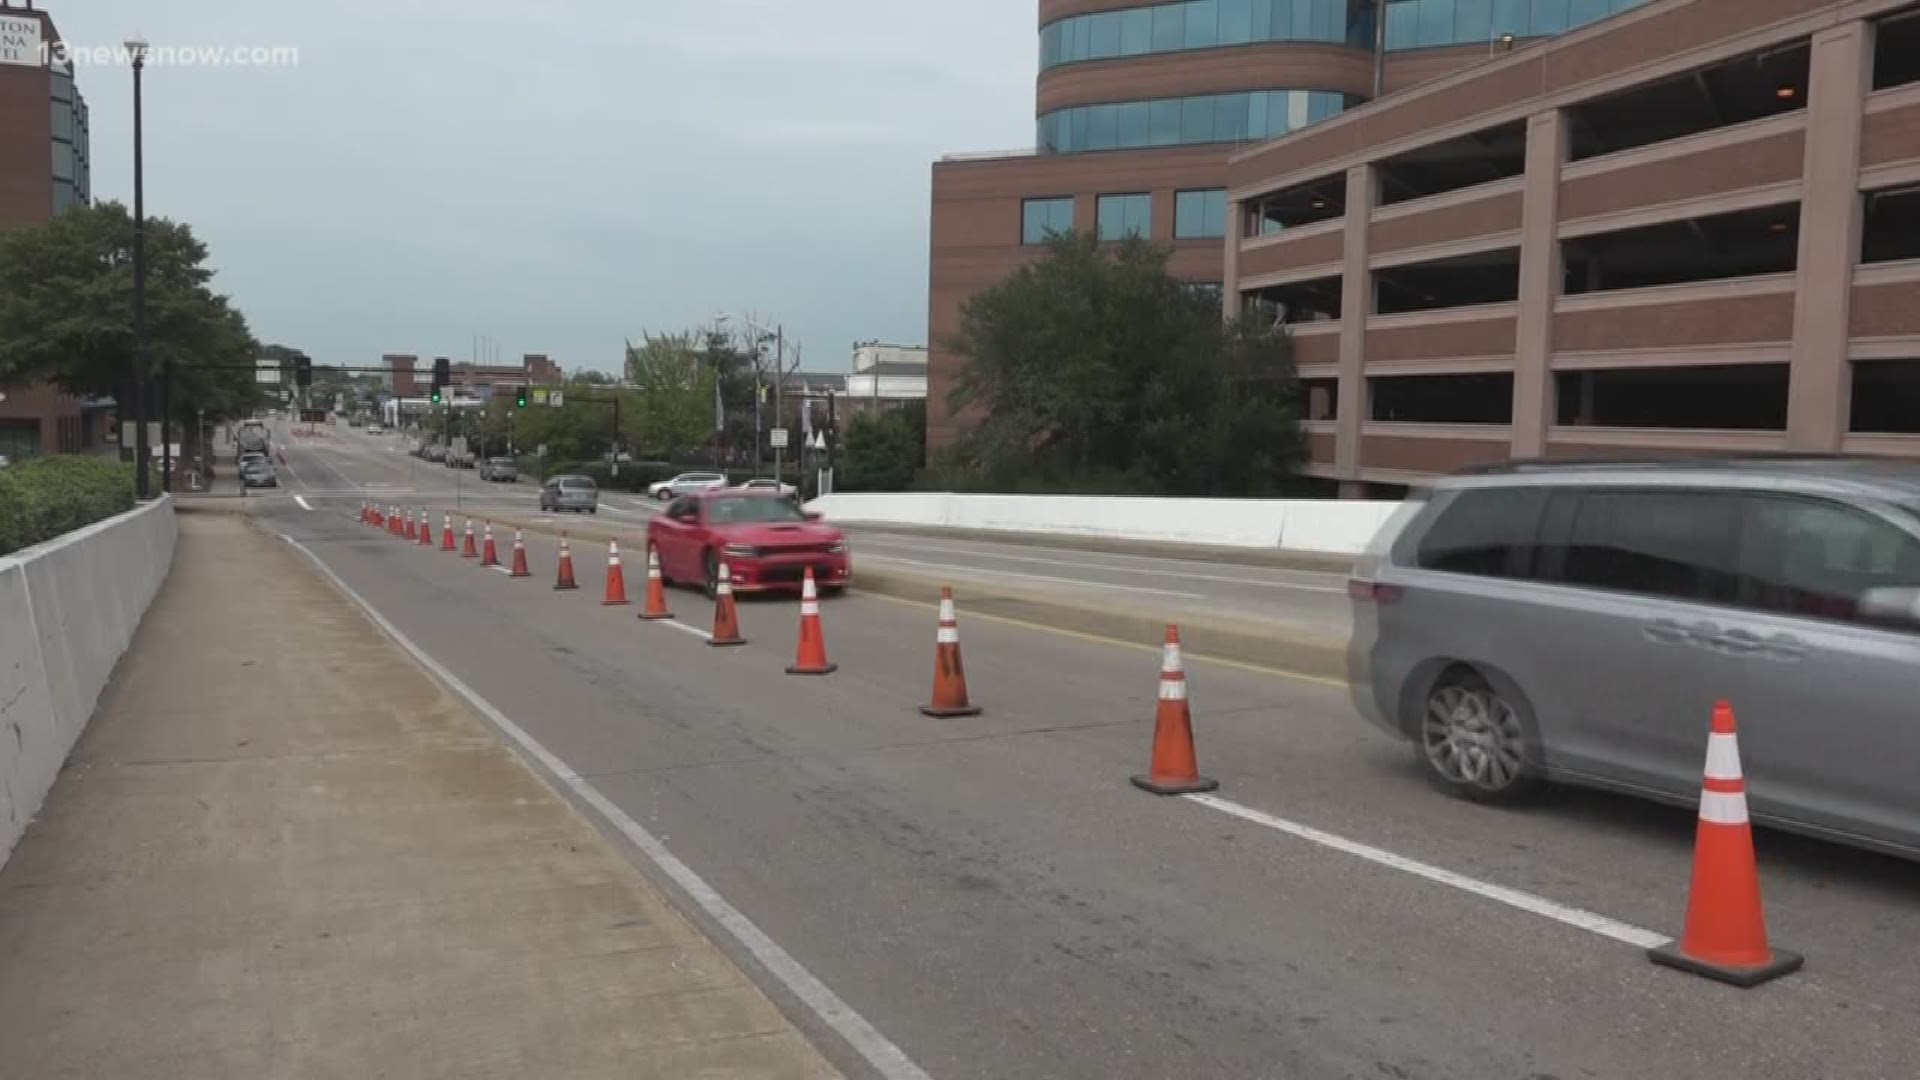 Relief might be on the way for those who use Settlers Landing Road in downtown Hampton. Currently, there are traffic cones set up to keep the lanes divided so those going to I-64 eastbound don't block traffic in both lanes.